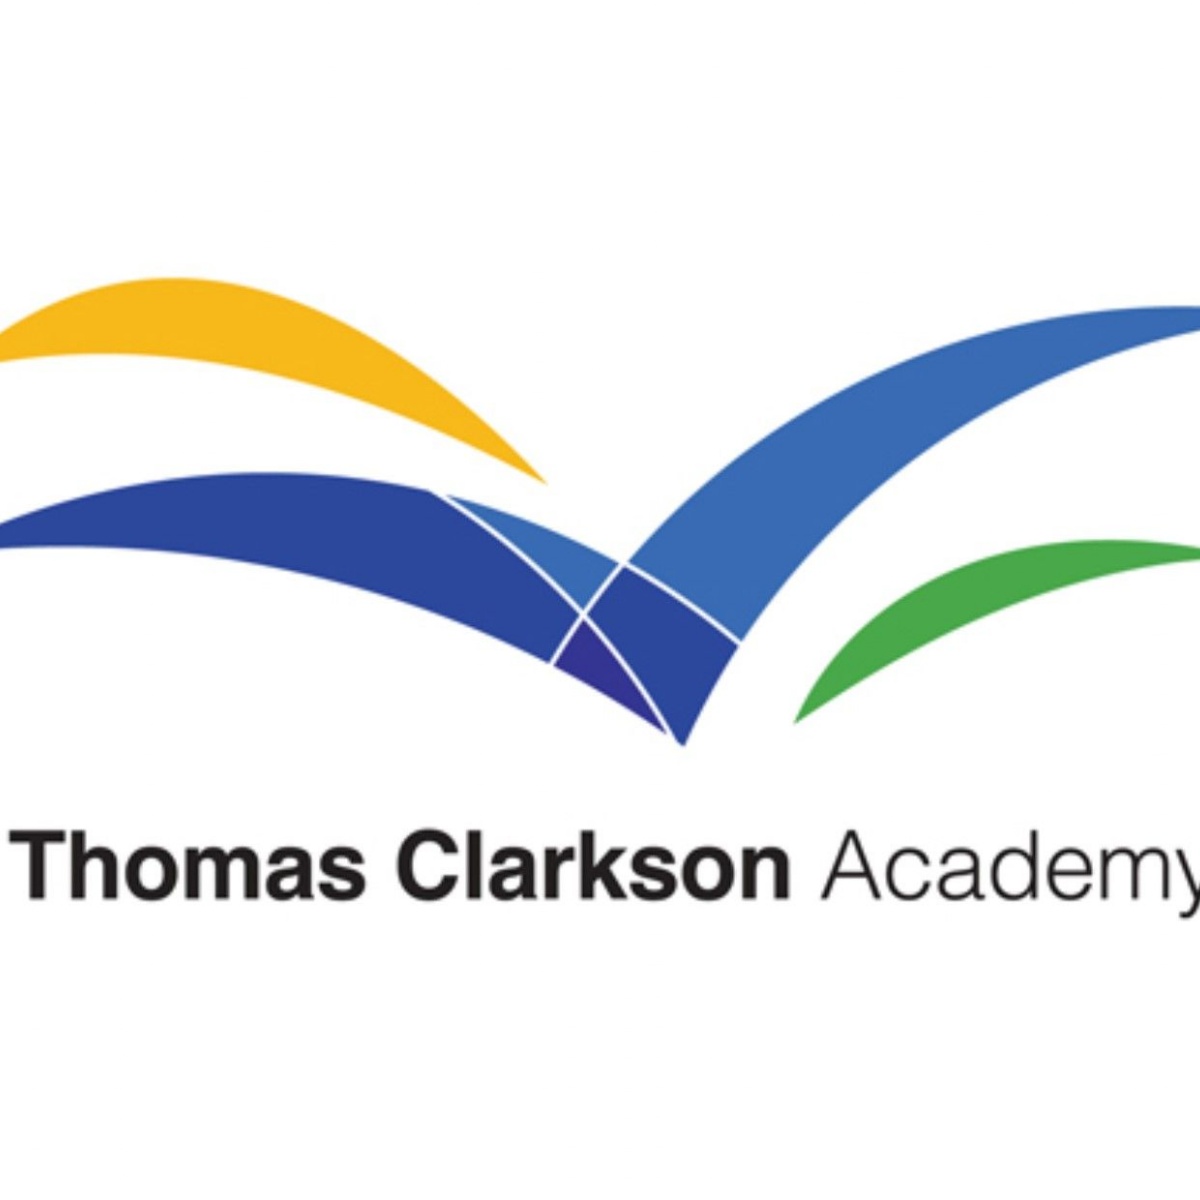 Thomas Clarkson Academy - Online learning